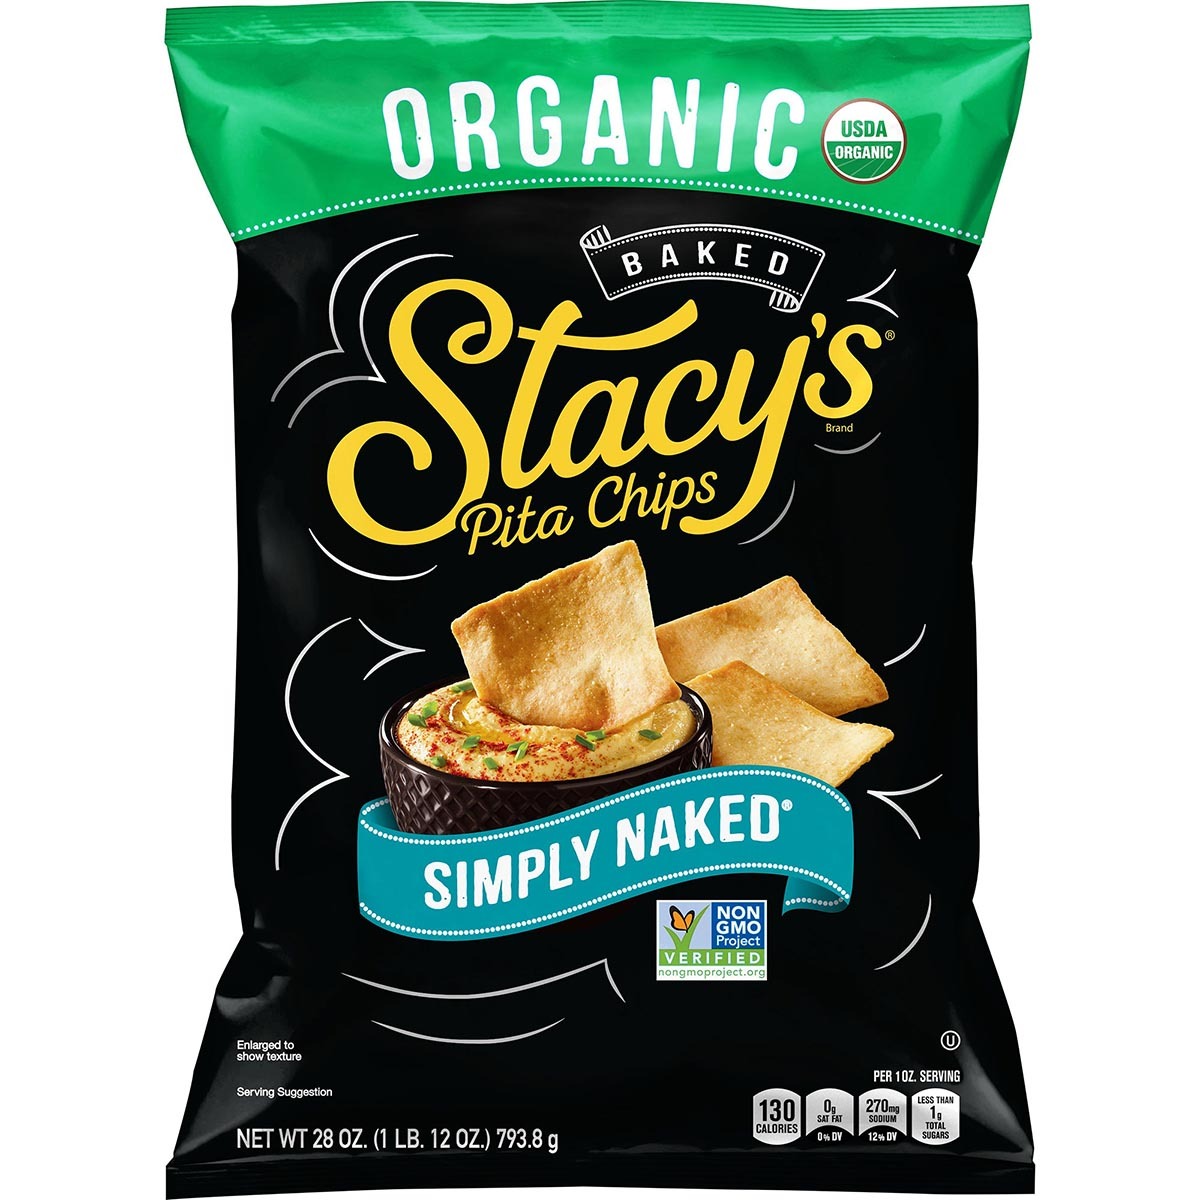 Black bag of crisps with Organic in bold at the top